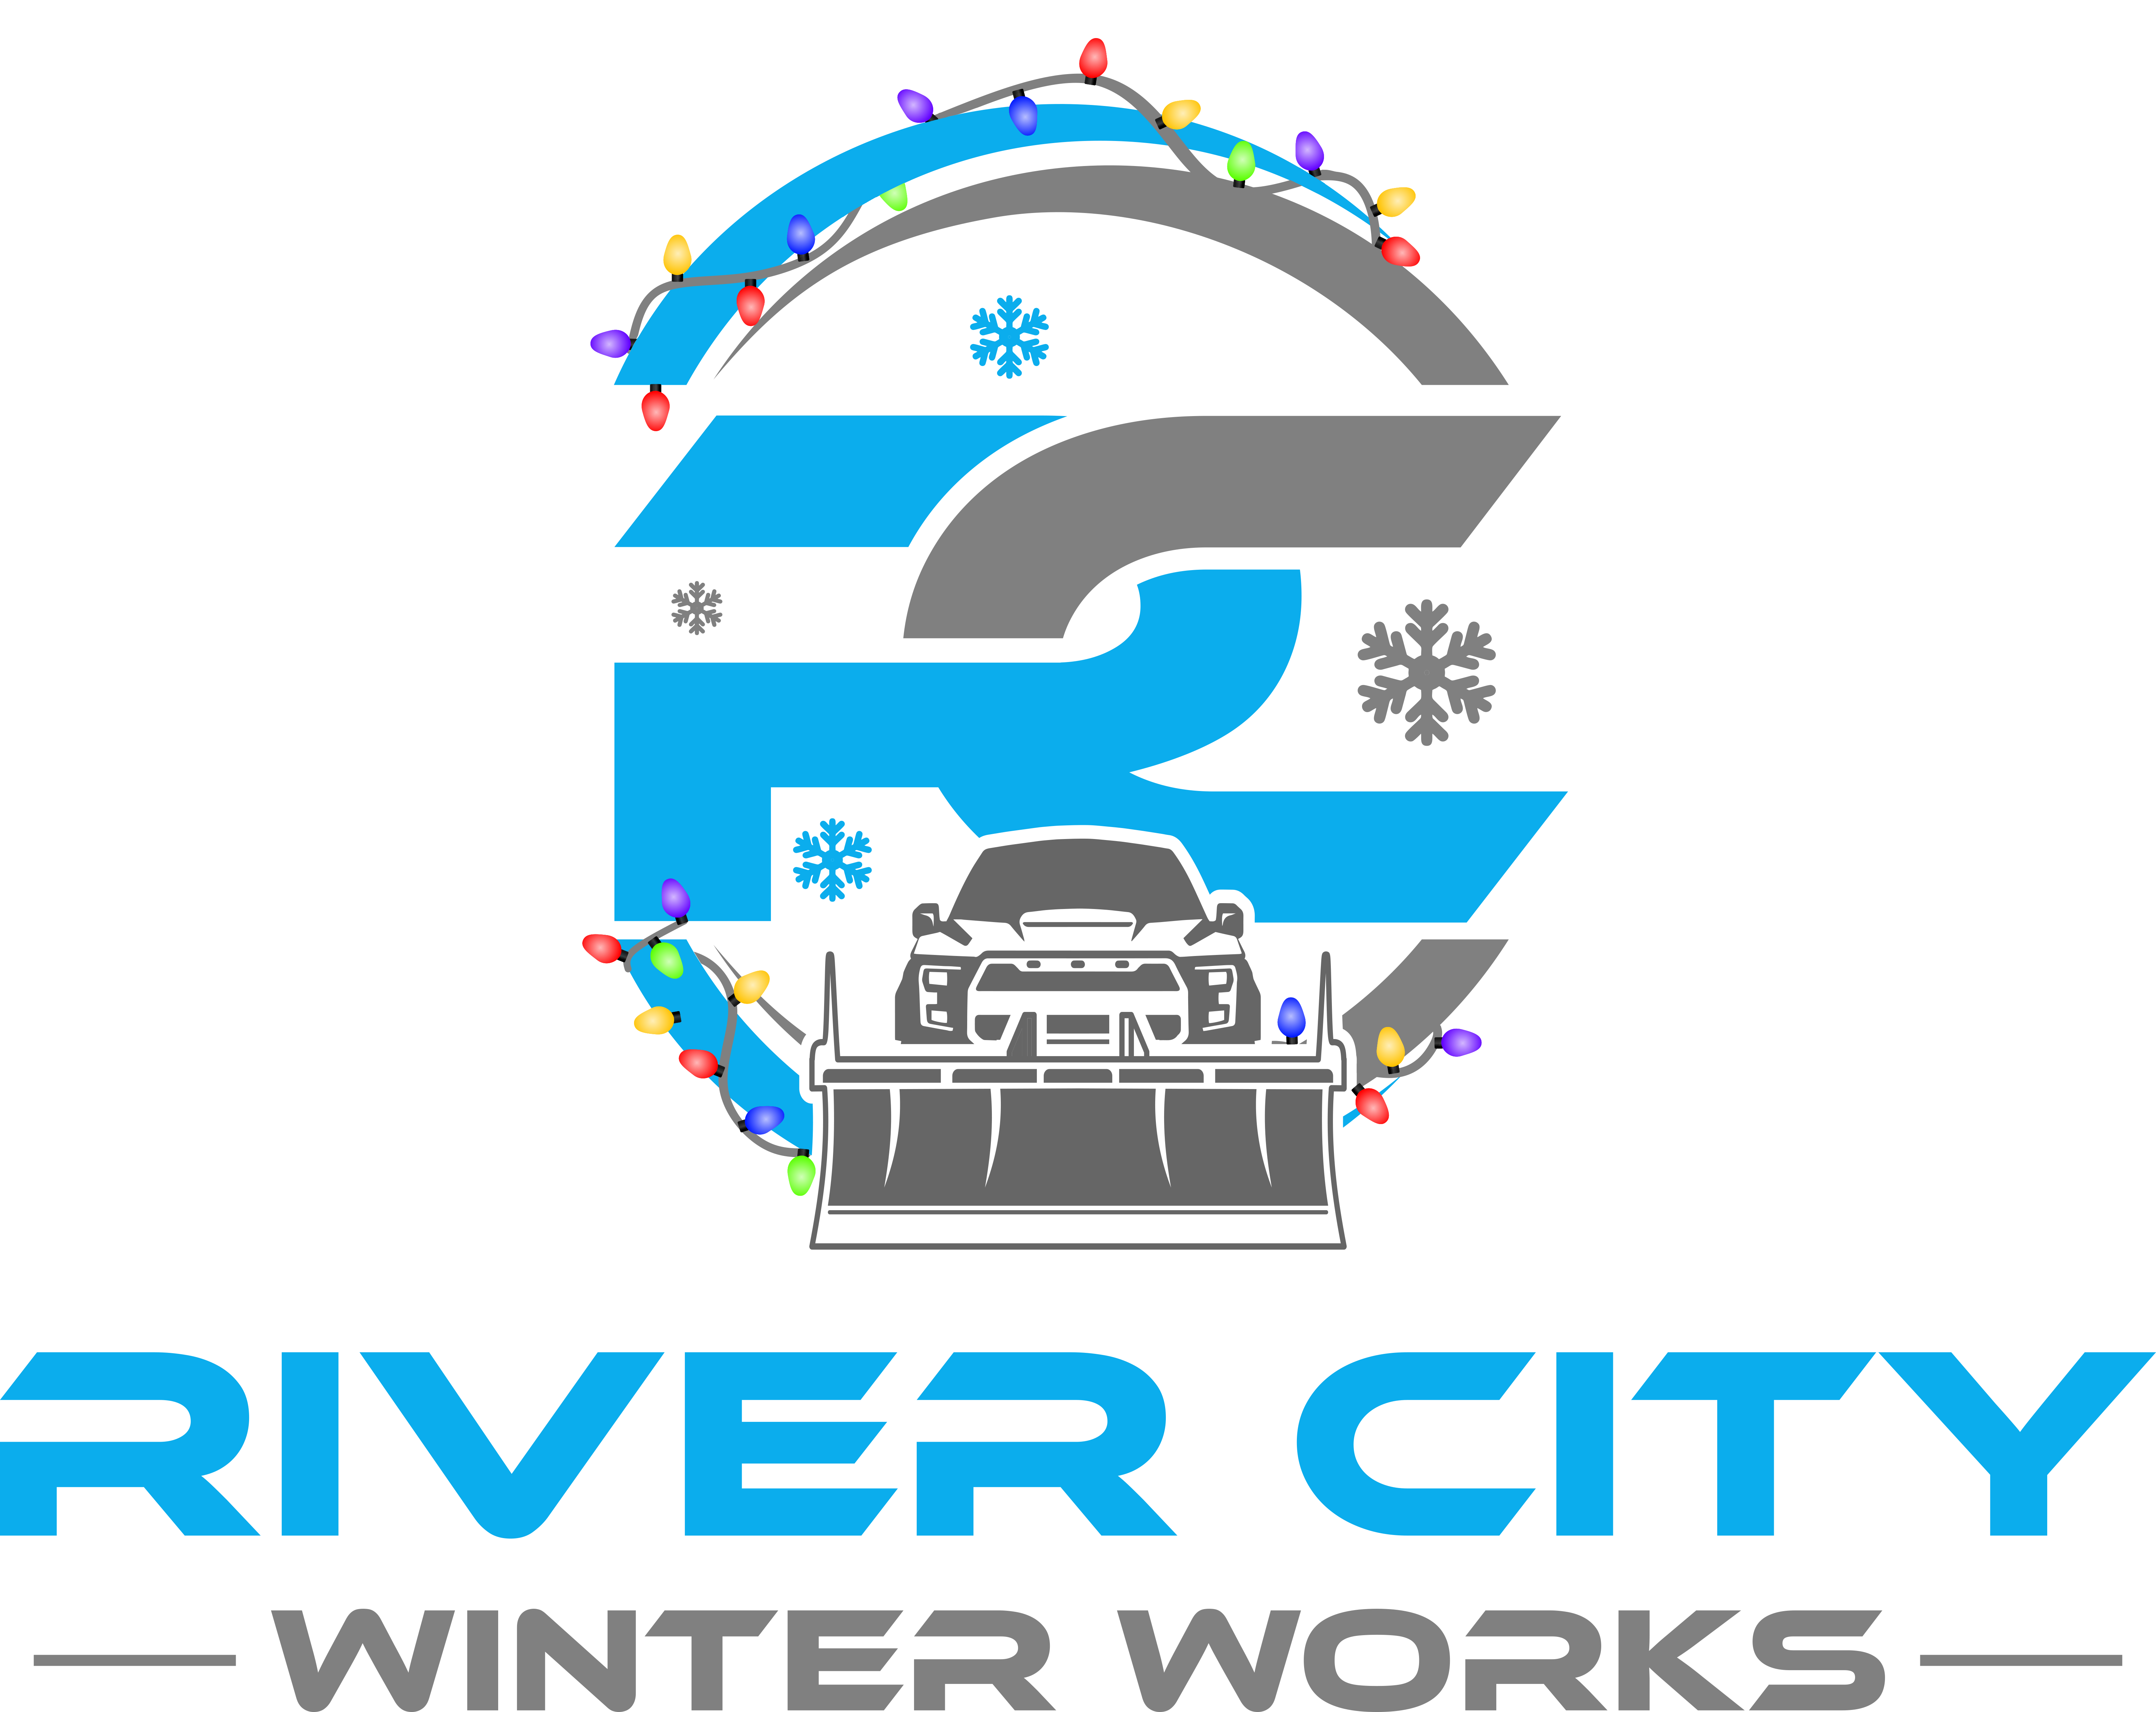 River City Winter Works Provides Gutter Cleaning, Christmas Light Installation, And Snow Removal to Central Illinois